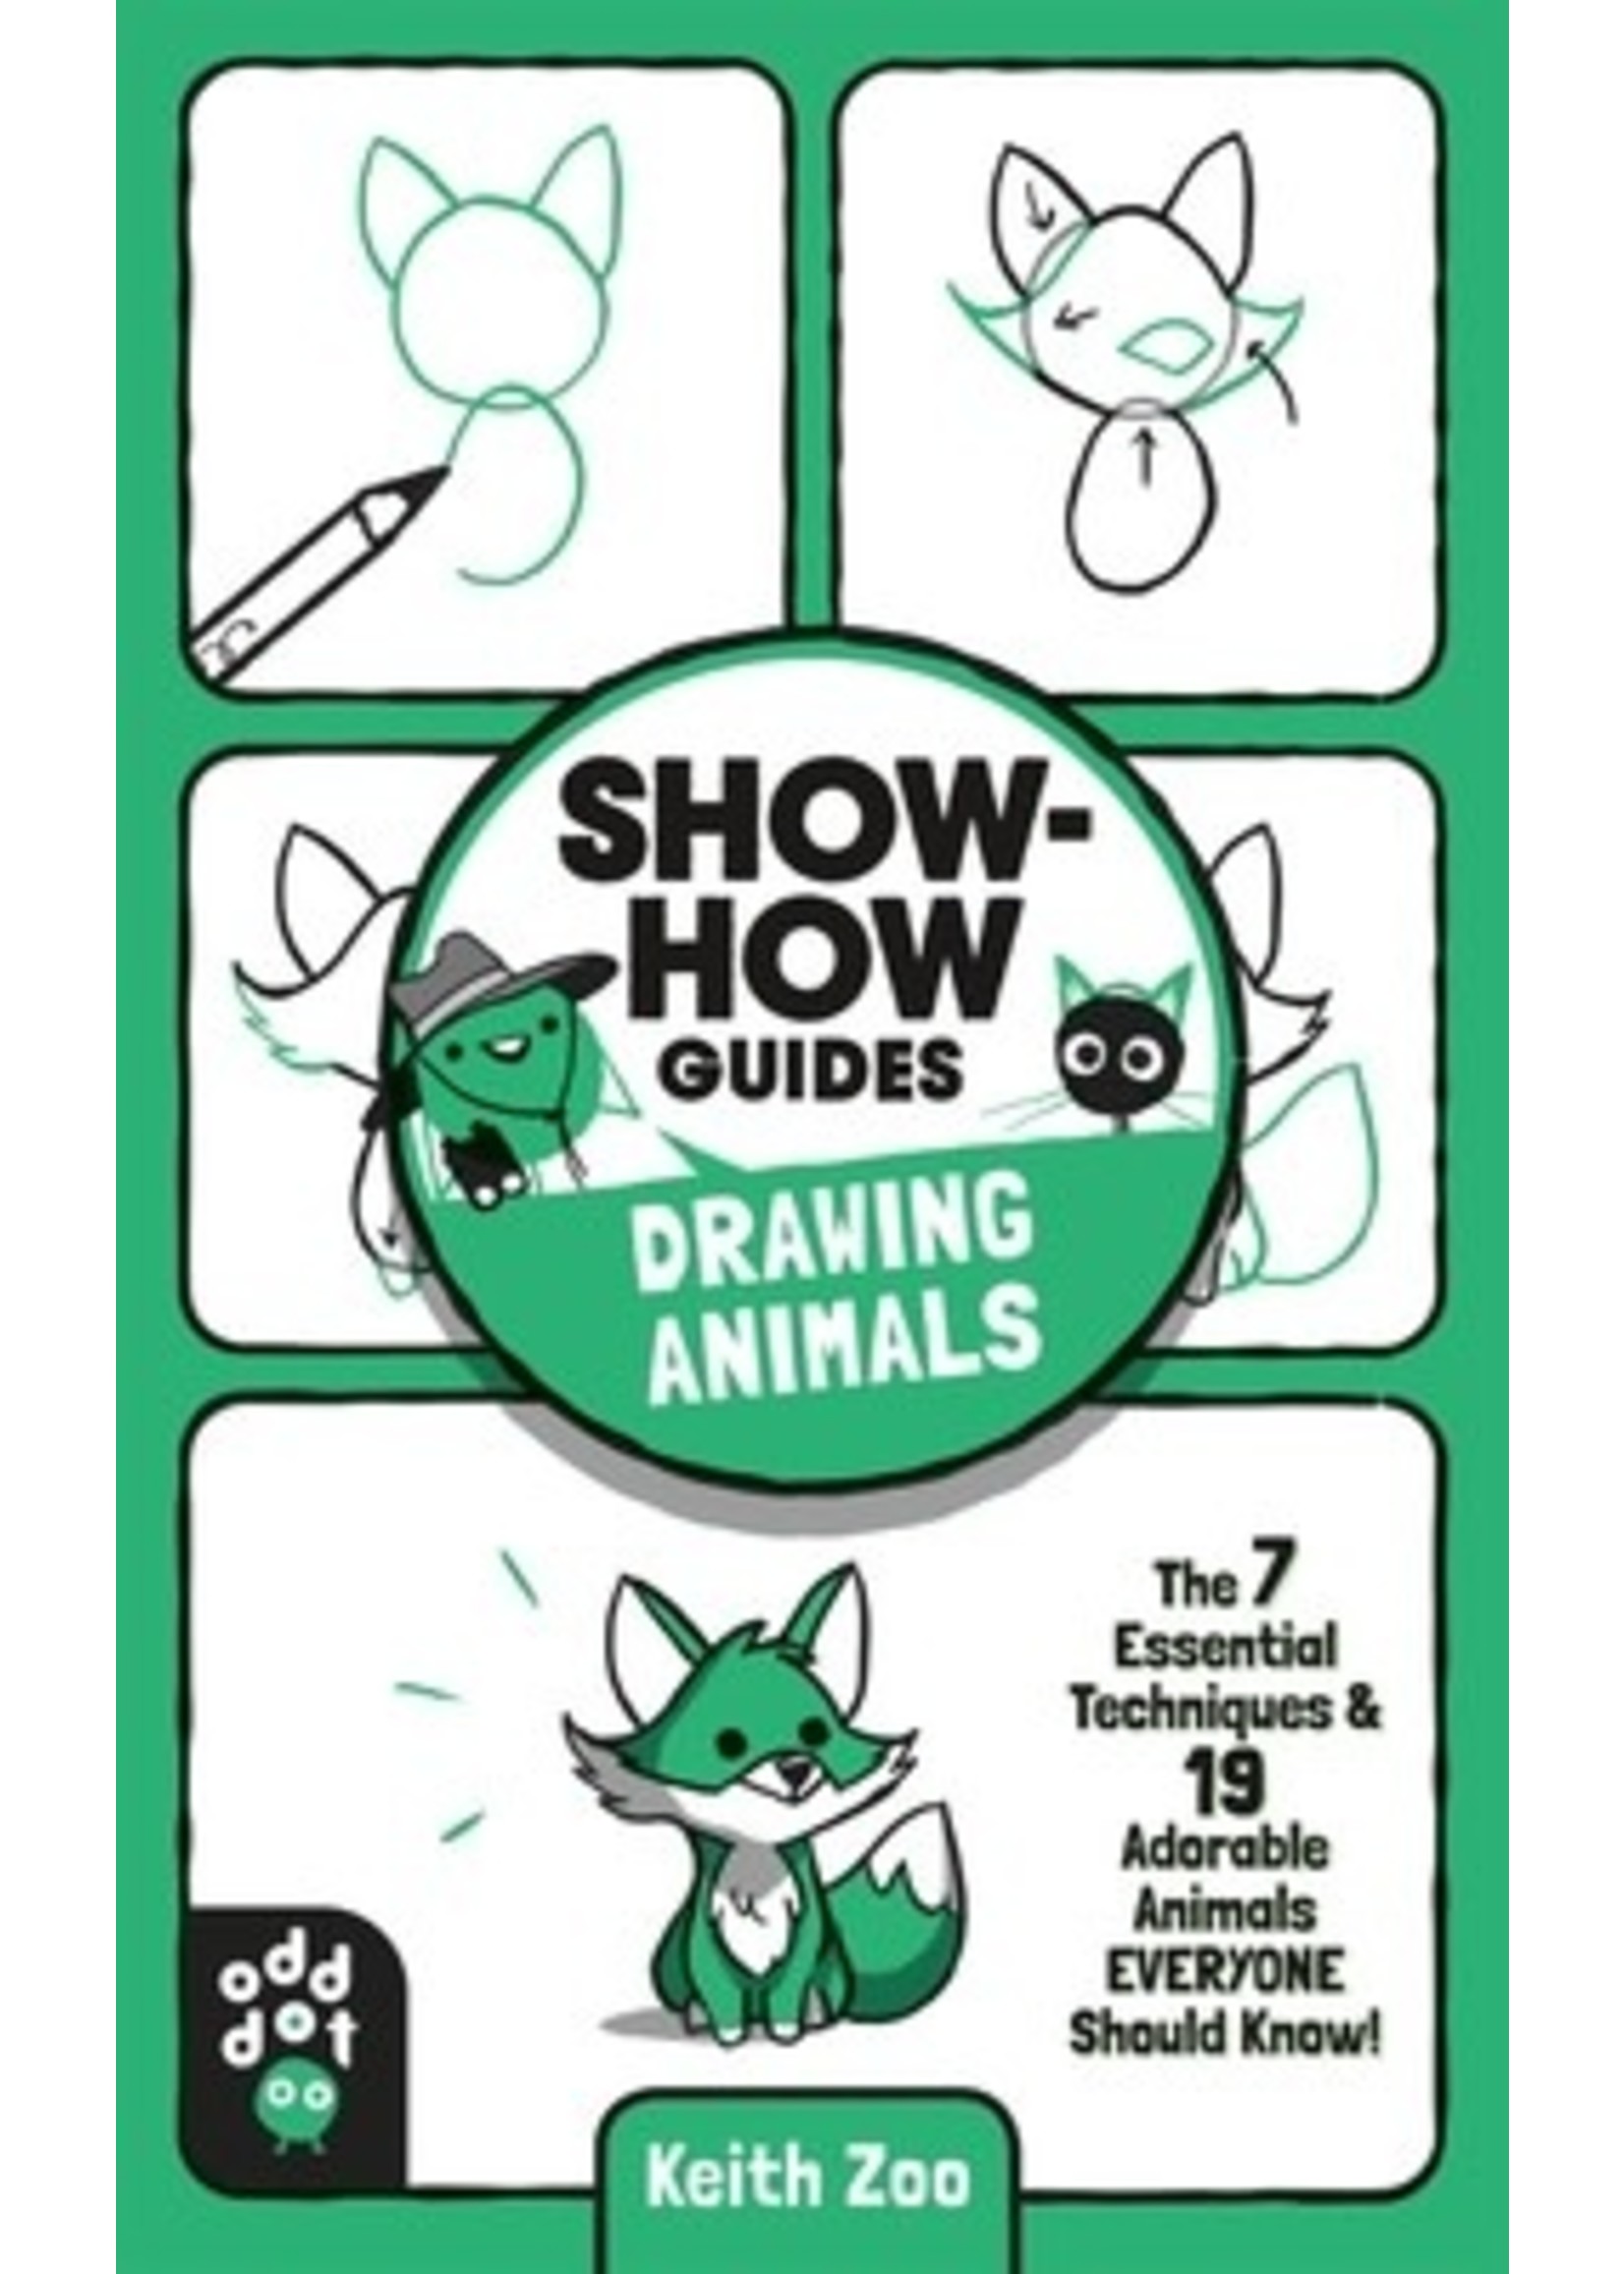 Show-How Guides: Drawing Animals: The 7 Essential Techniques 19 Adorable Animals Everyone Should Know! by Keith Zulawnik